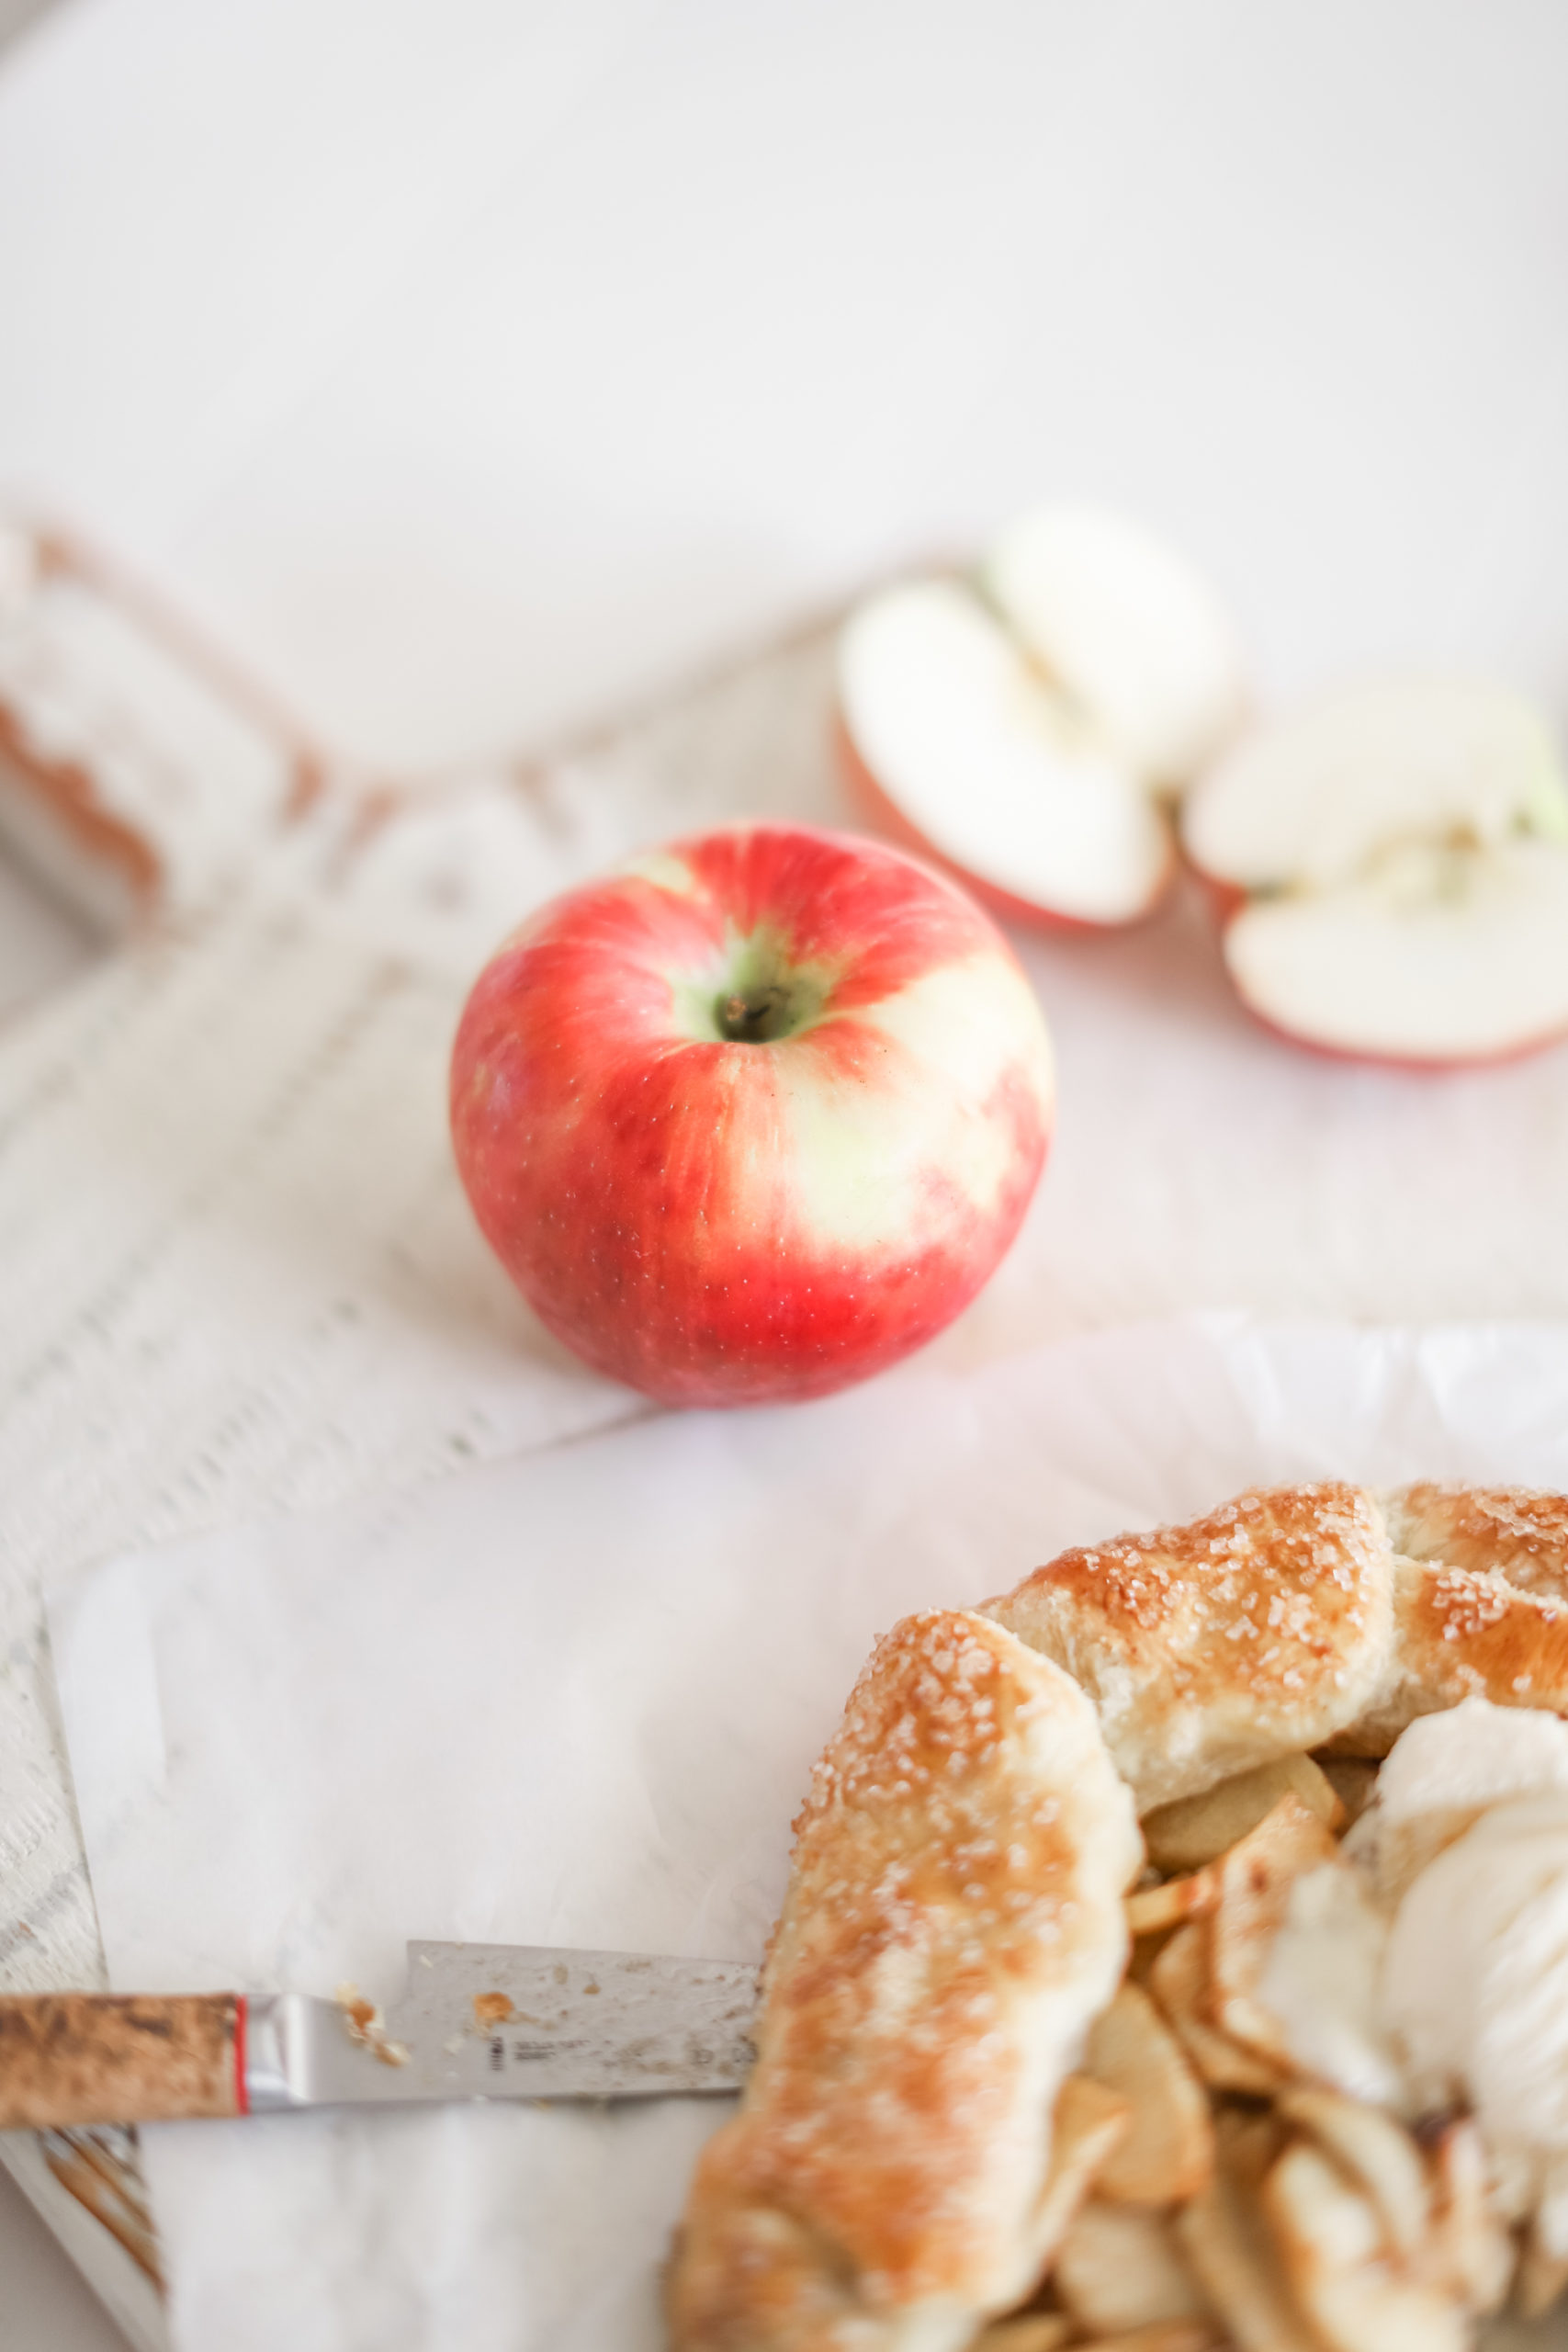 Simple Apple Galette recipe perfect for the holidays and colder weather - the perfect comfort food!